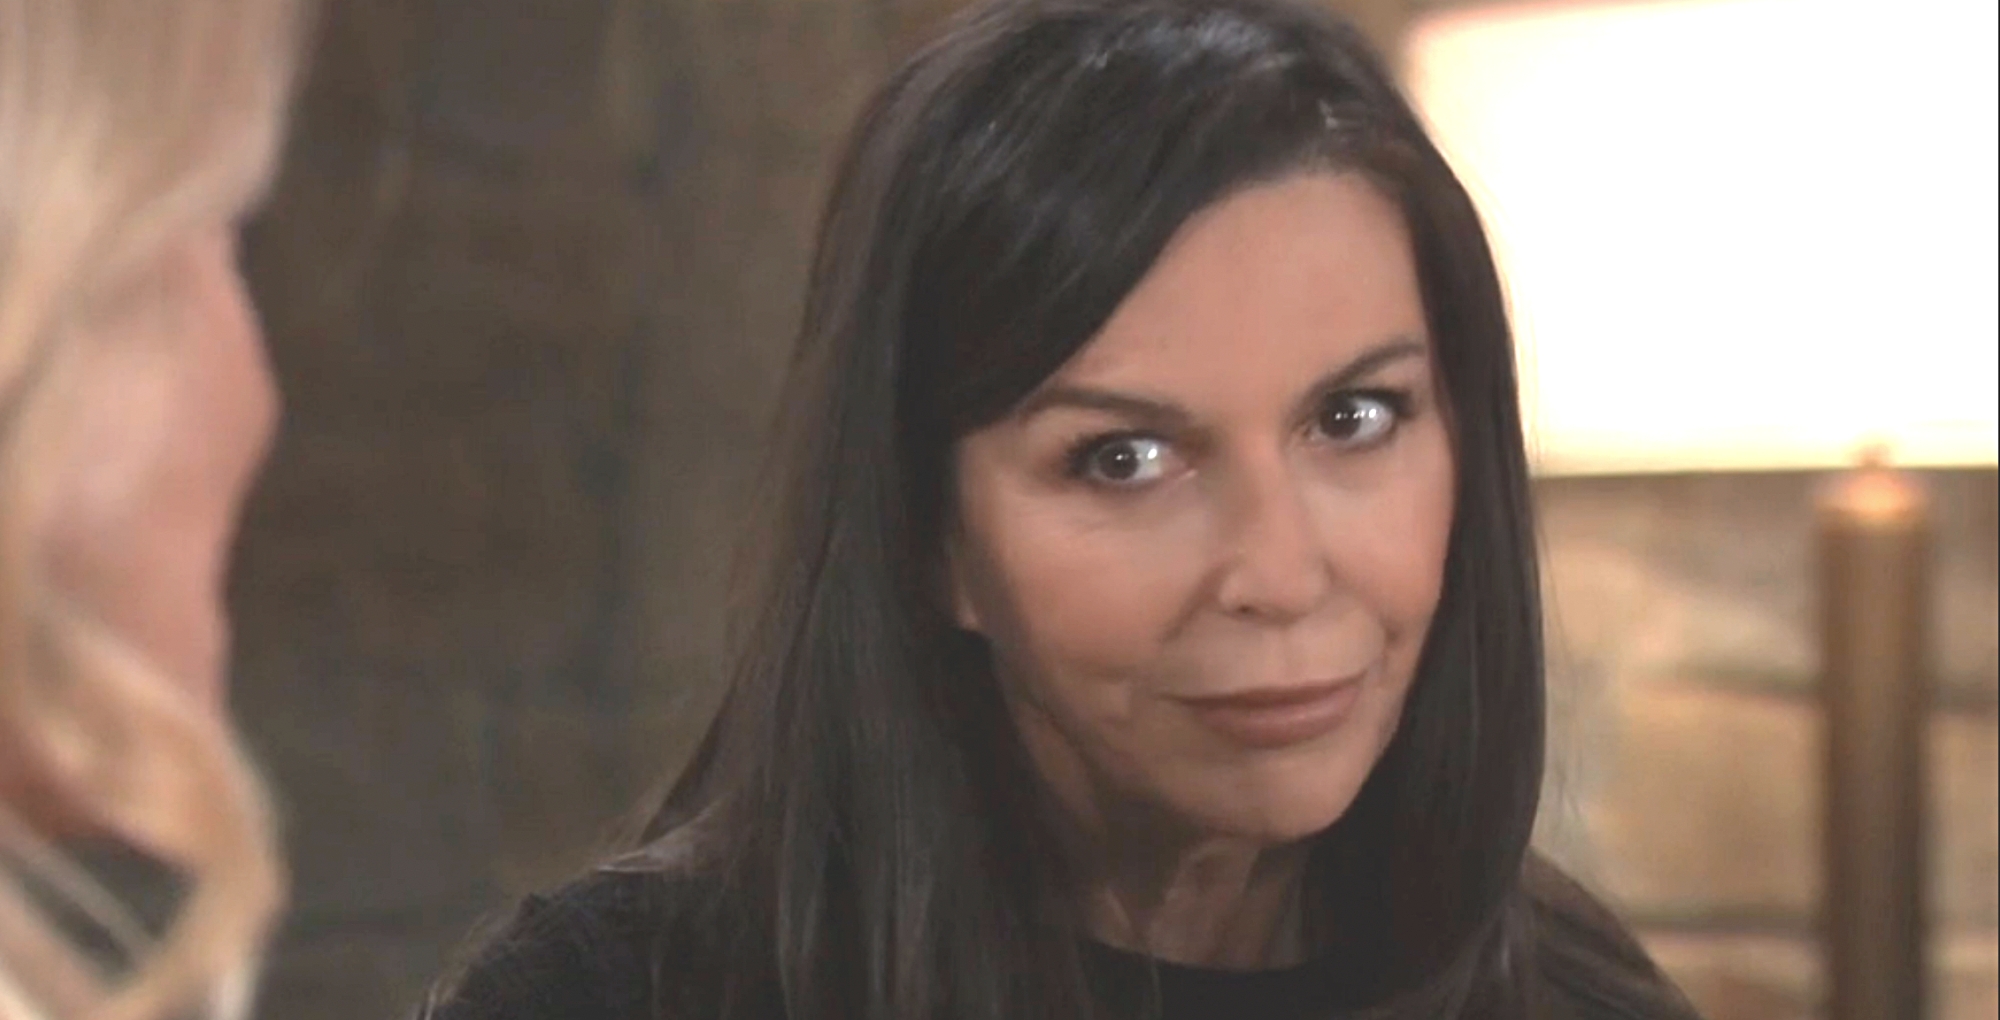 general hospital recap has anna devane smiling at the thought she's gaslighting the deputy mayor